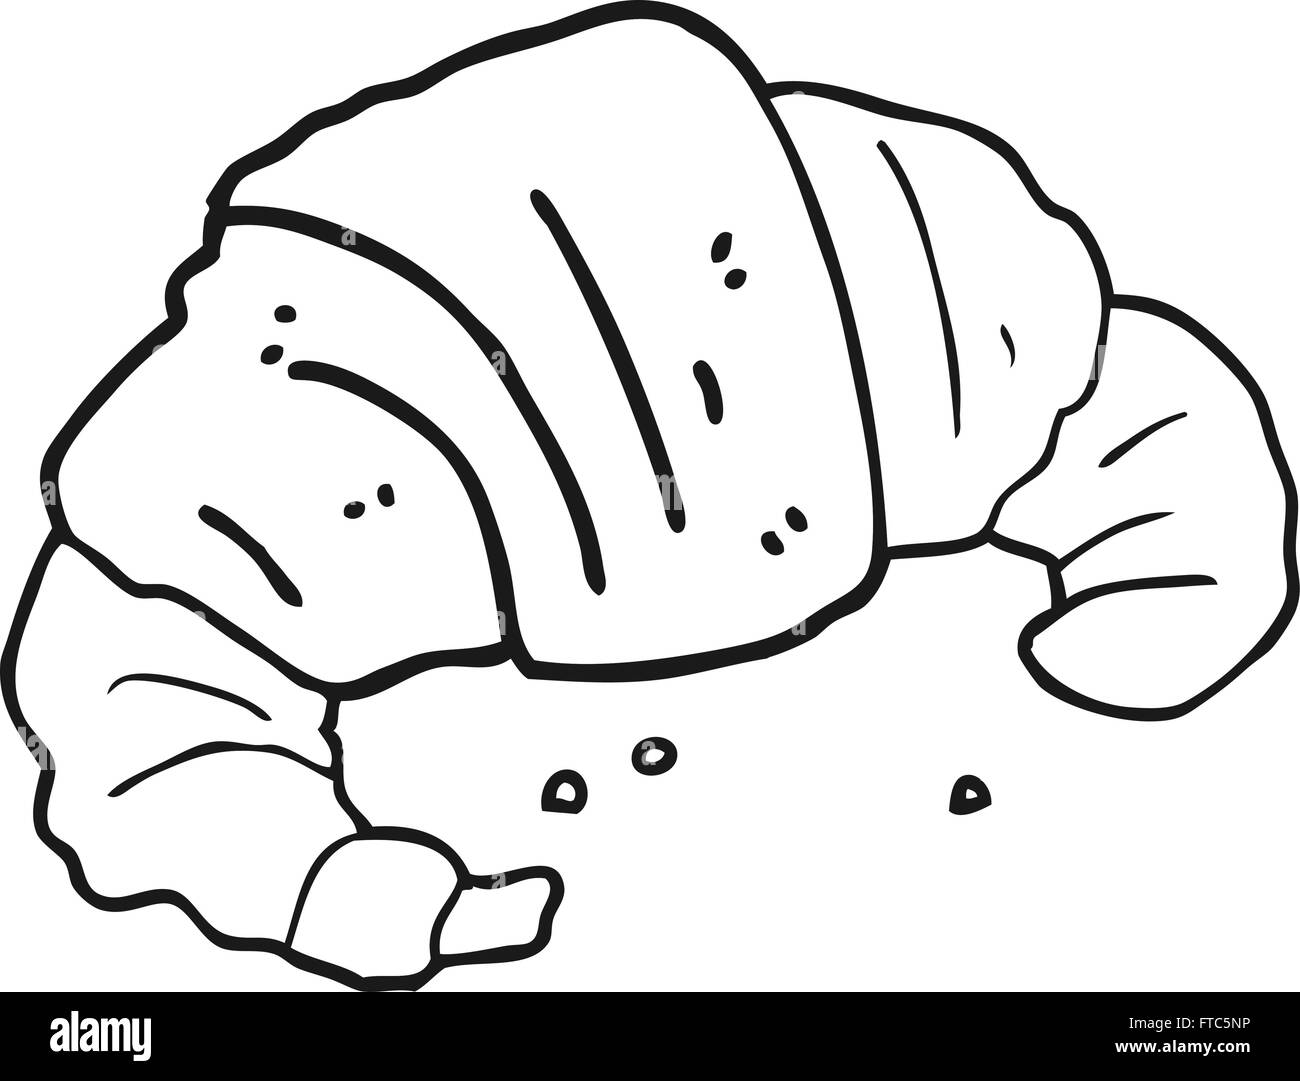 freehand drawn black and white cartoon croissant Stock Vector